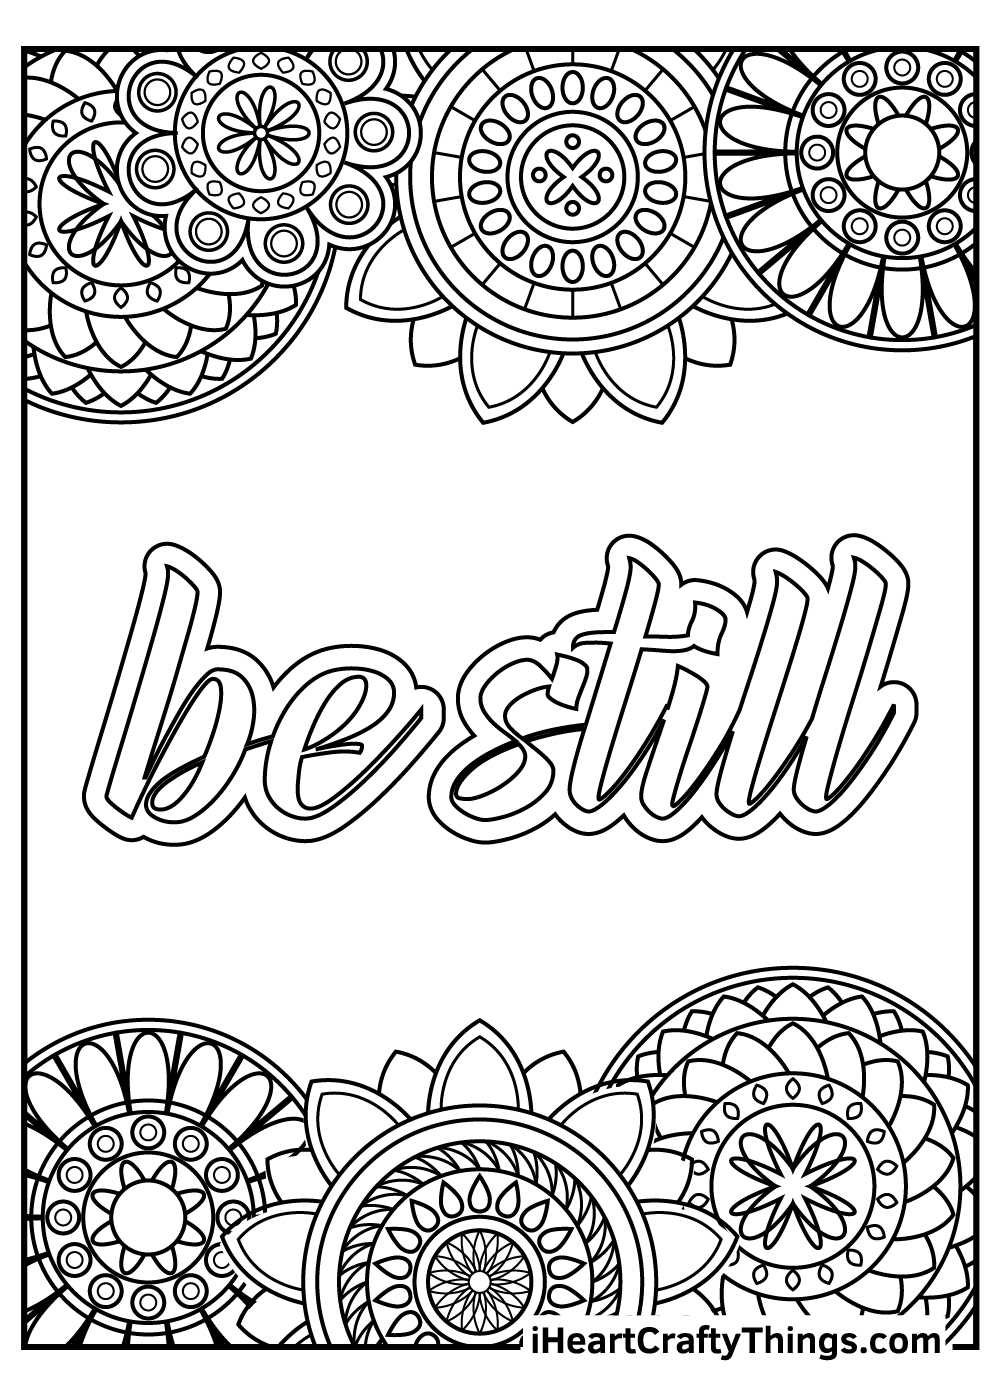 Stress relief coloring pages free printables